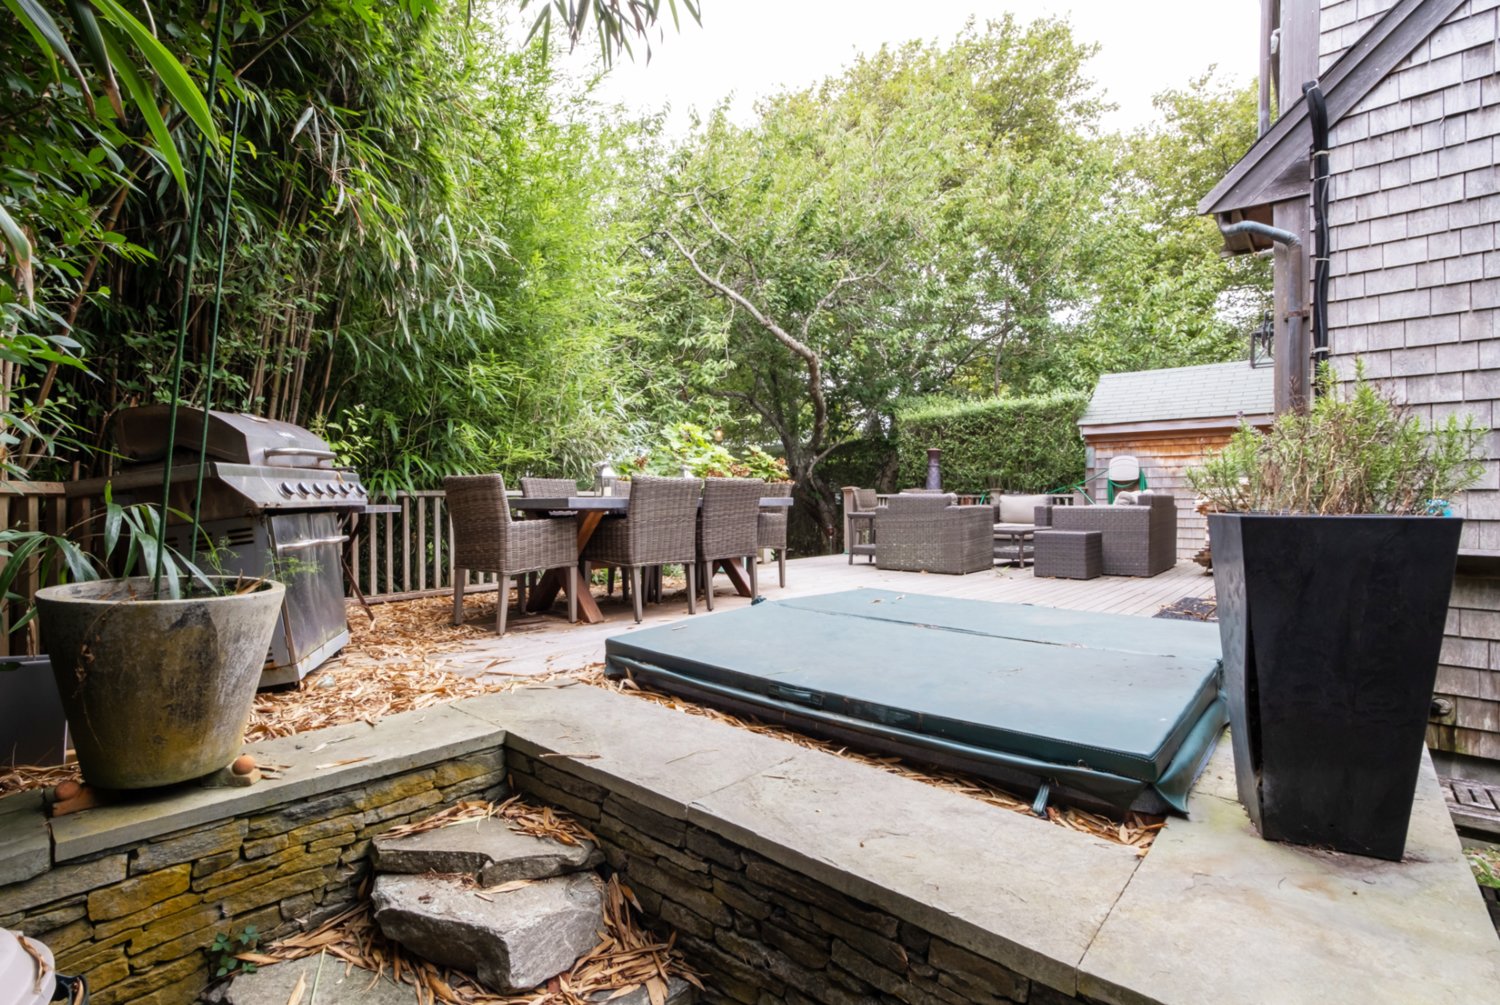 The stone patio has a hot tub and plenty of room for dining and entertaining.